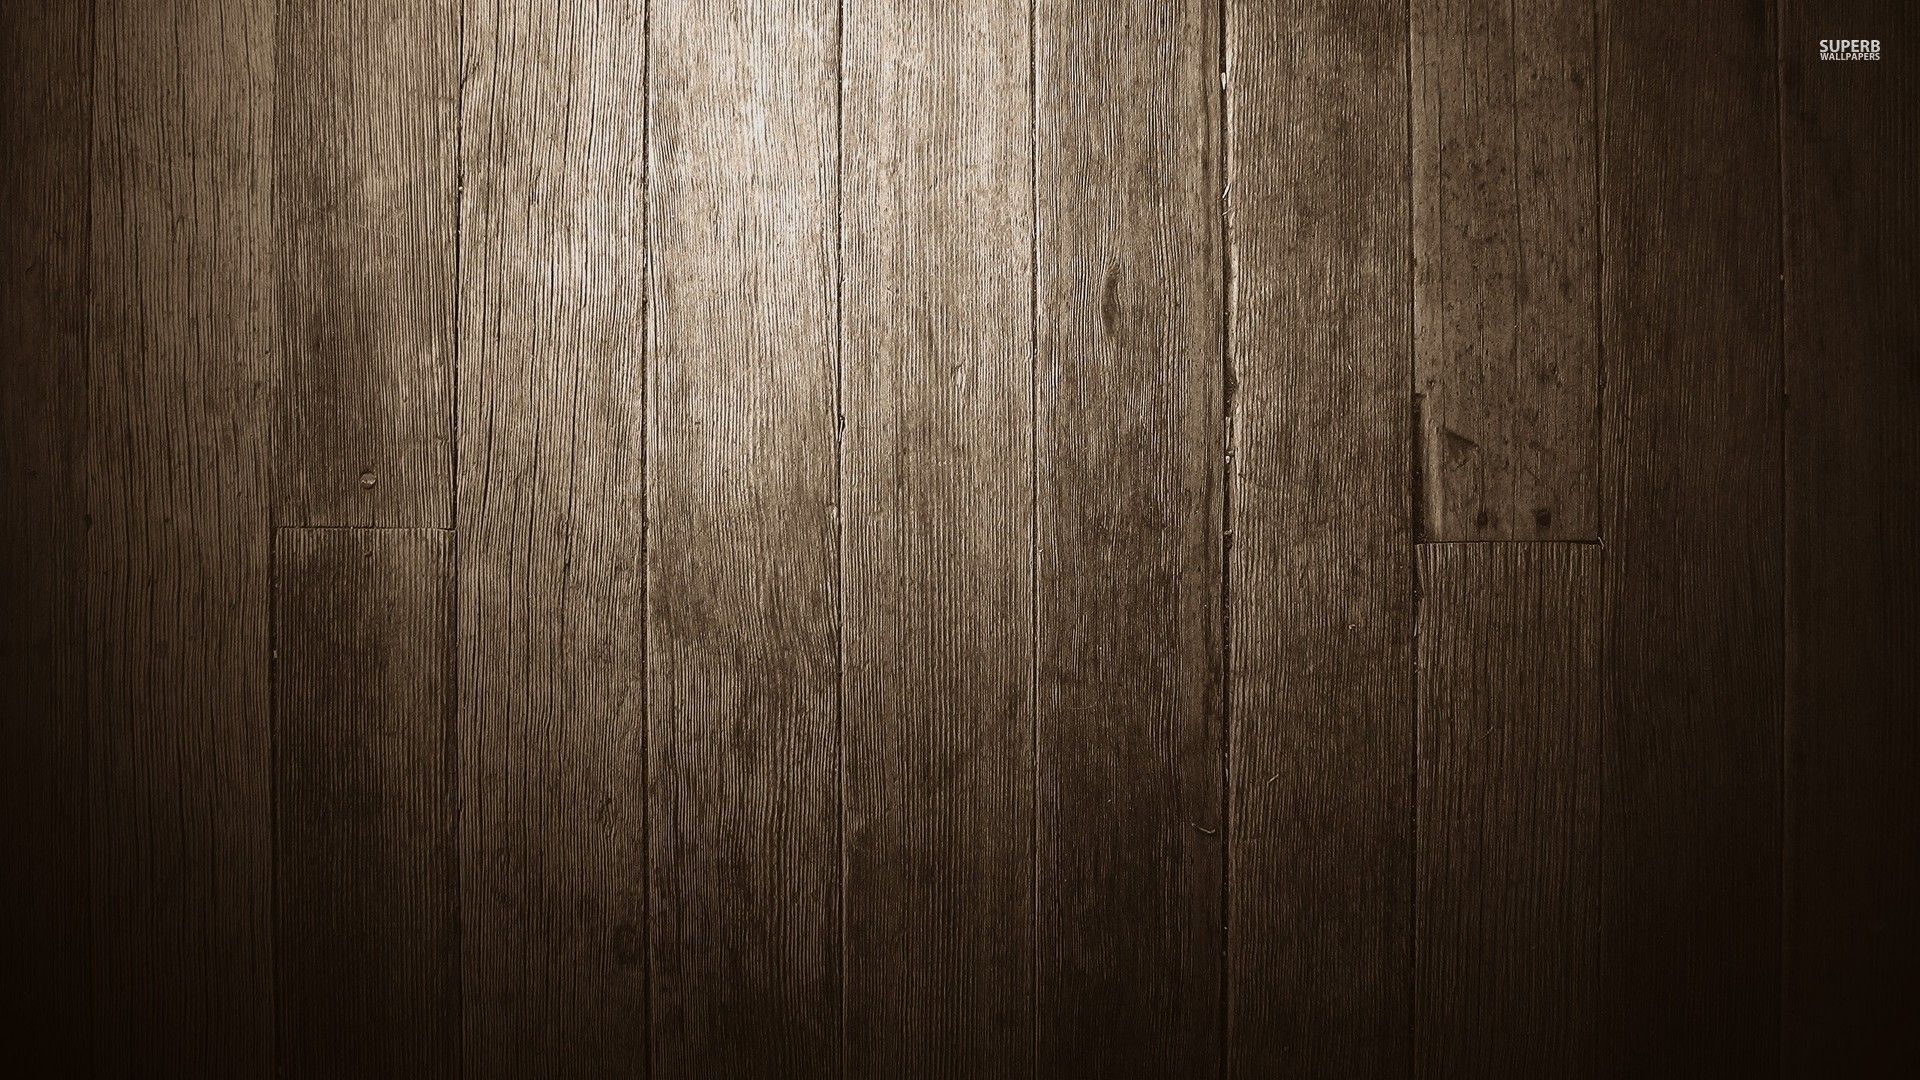 Wood panels wallpaper - Photography wallpapers -